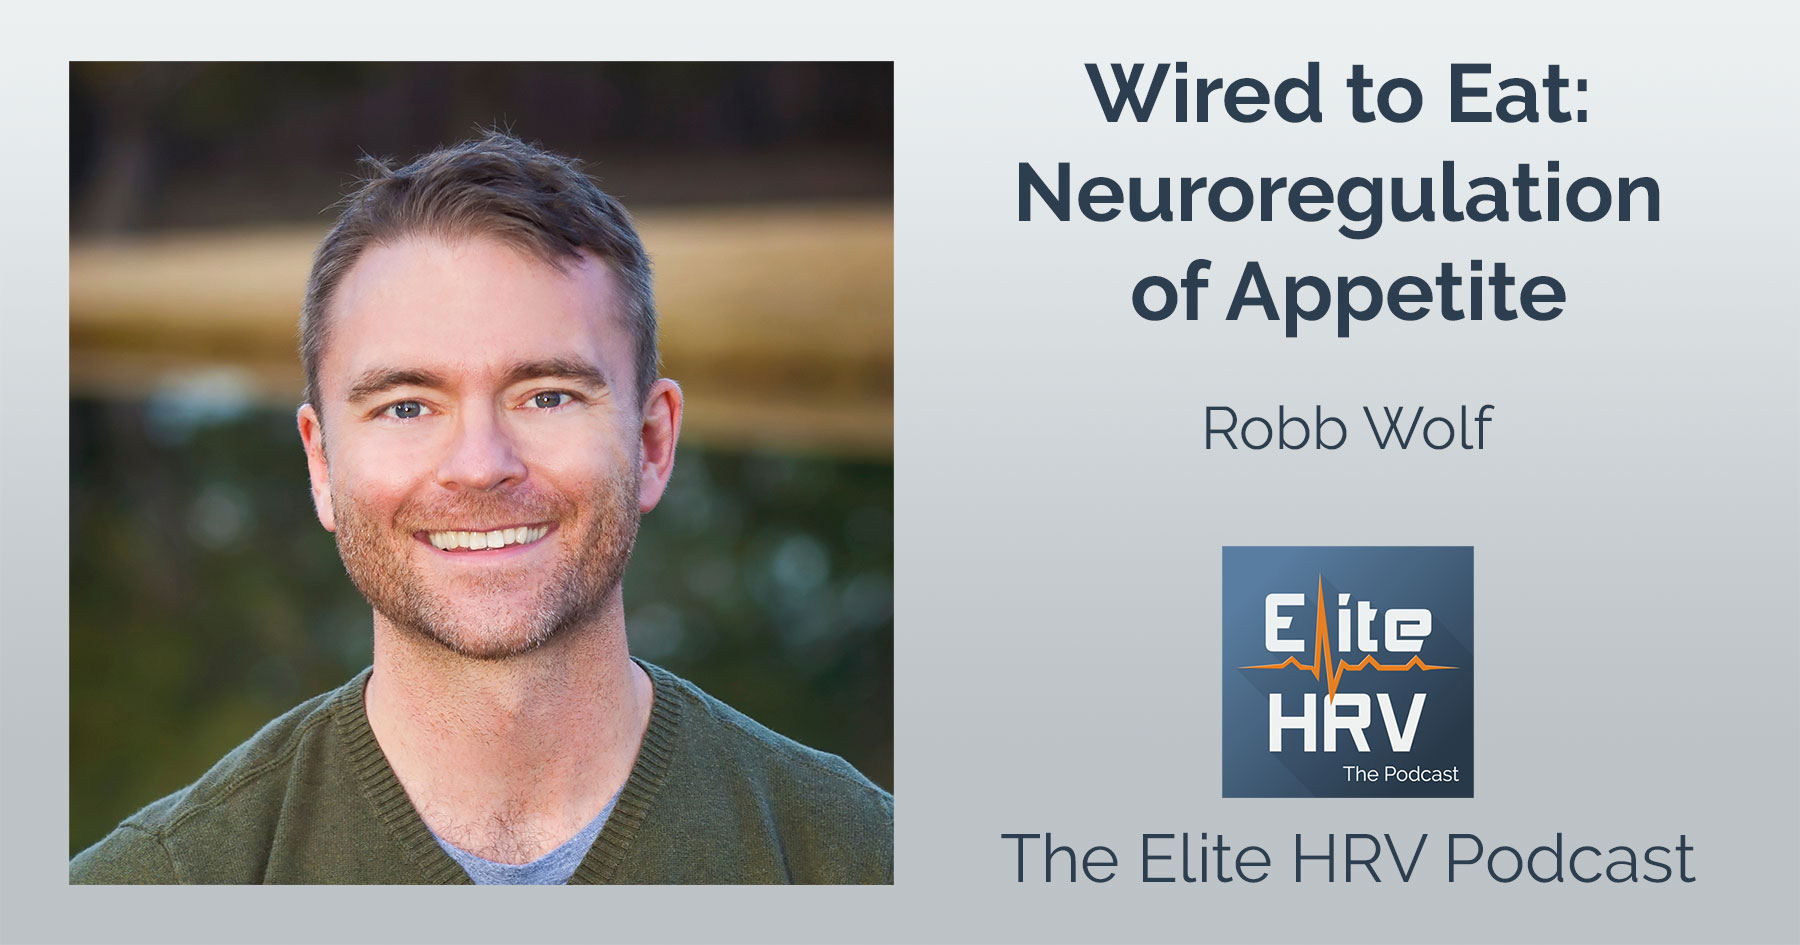 Wired to Eat: Neuroregulation of Appetite with Robb Wolf